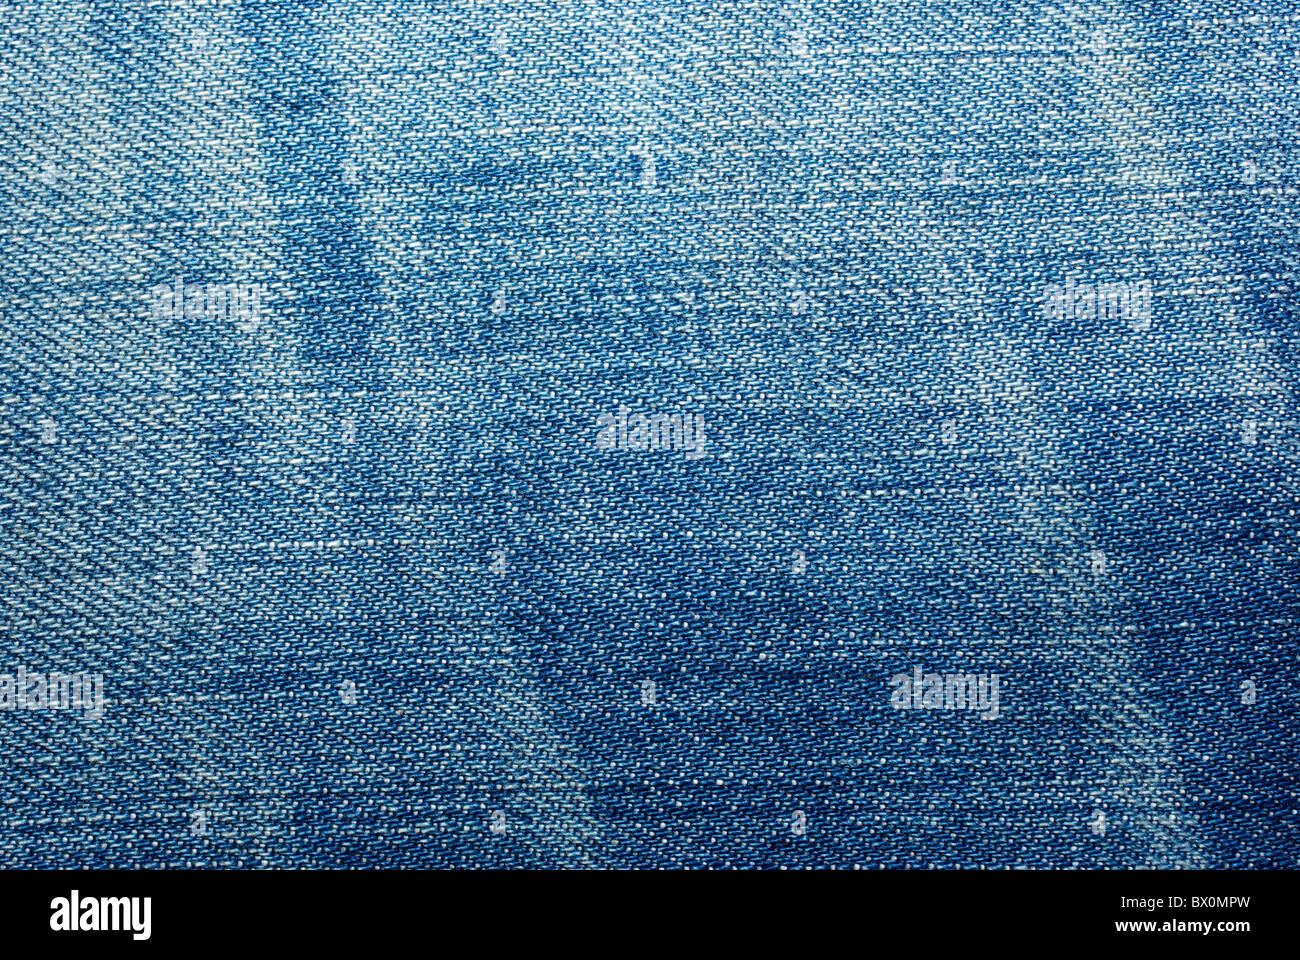 Blue worn jeans cloth textured abstract background Stock Photo - Alamy